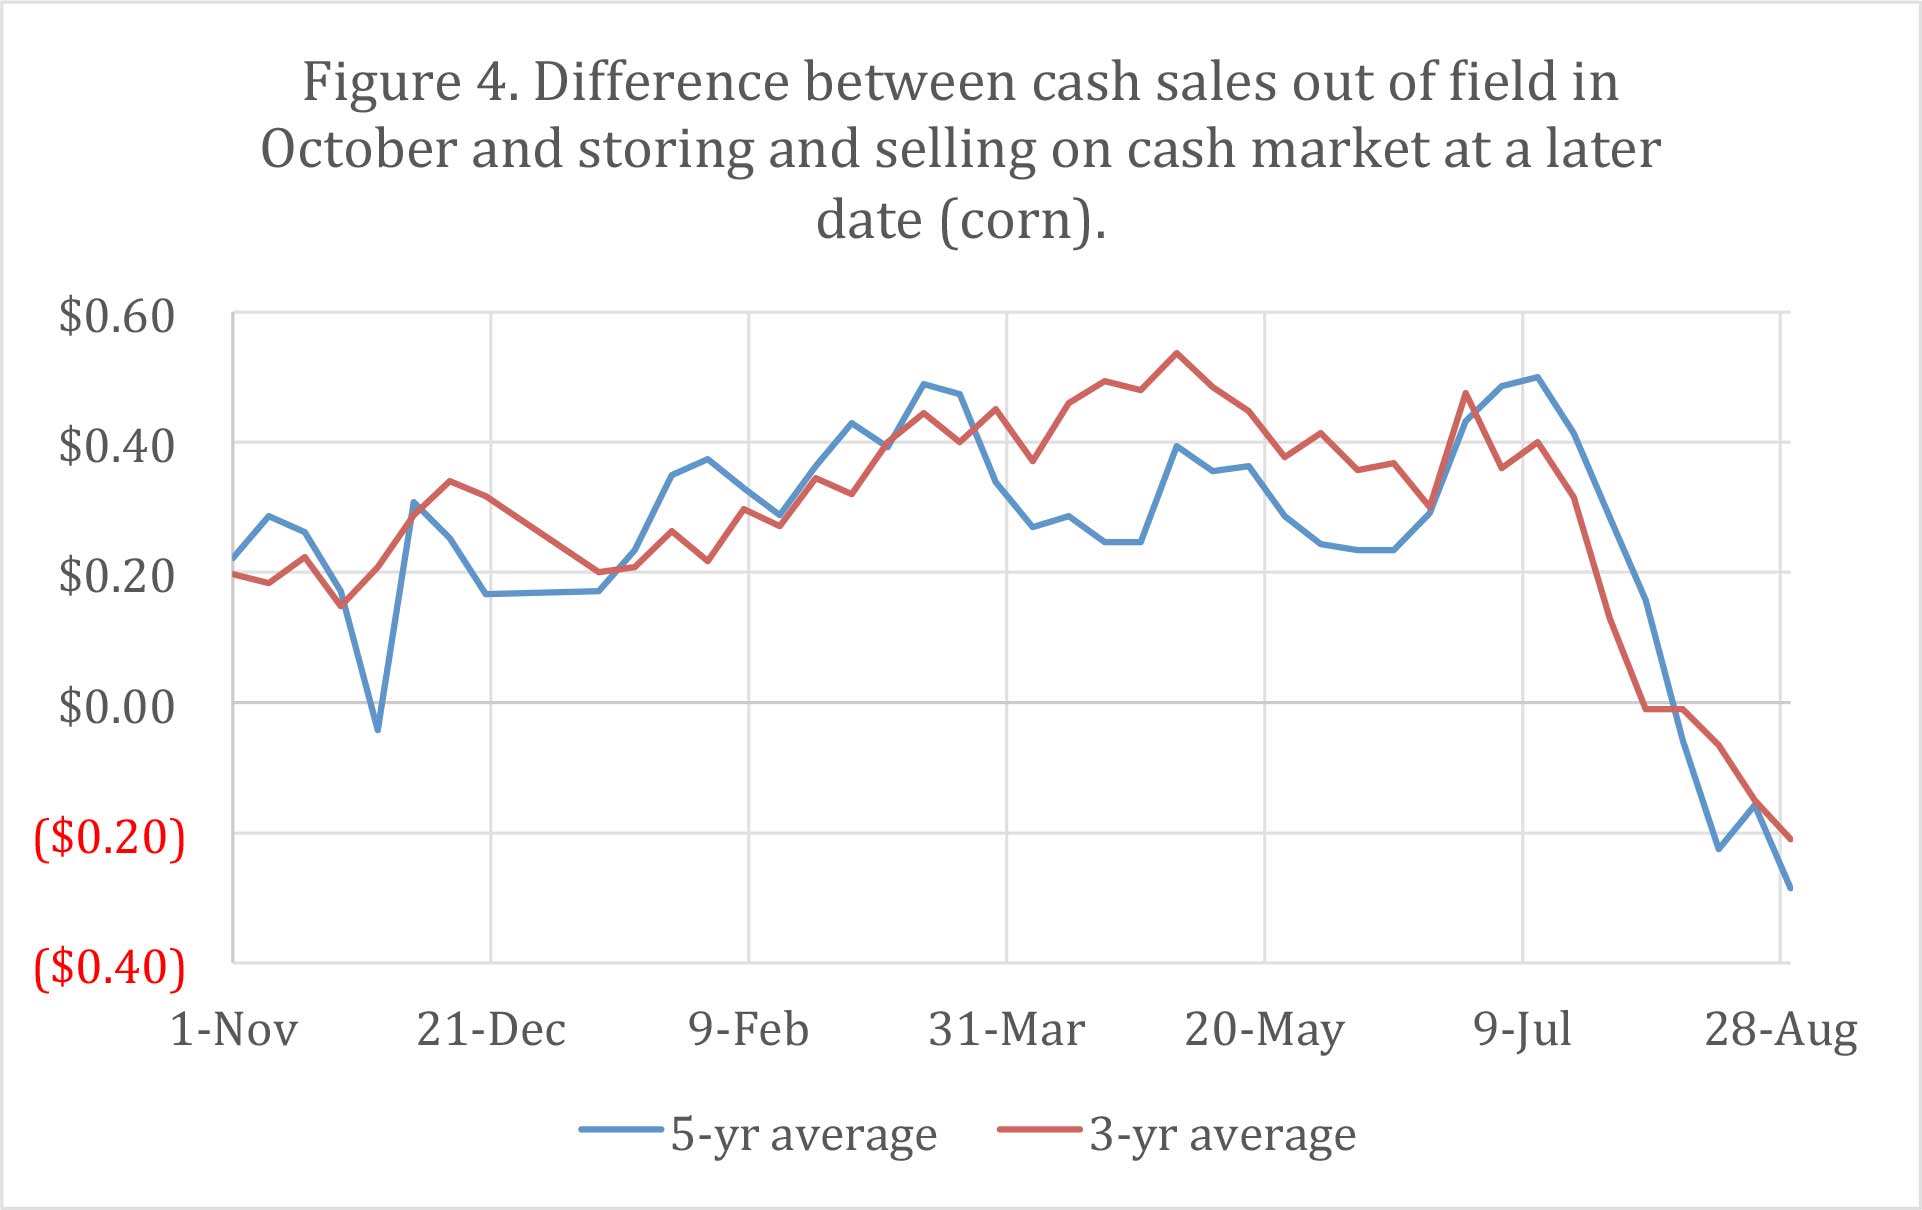 Figure 4. Difference between cash sales out of Gield in October and storing and selling on cash market at a later date (corn). 